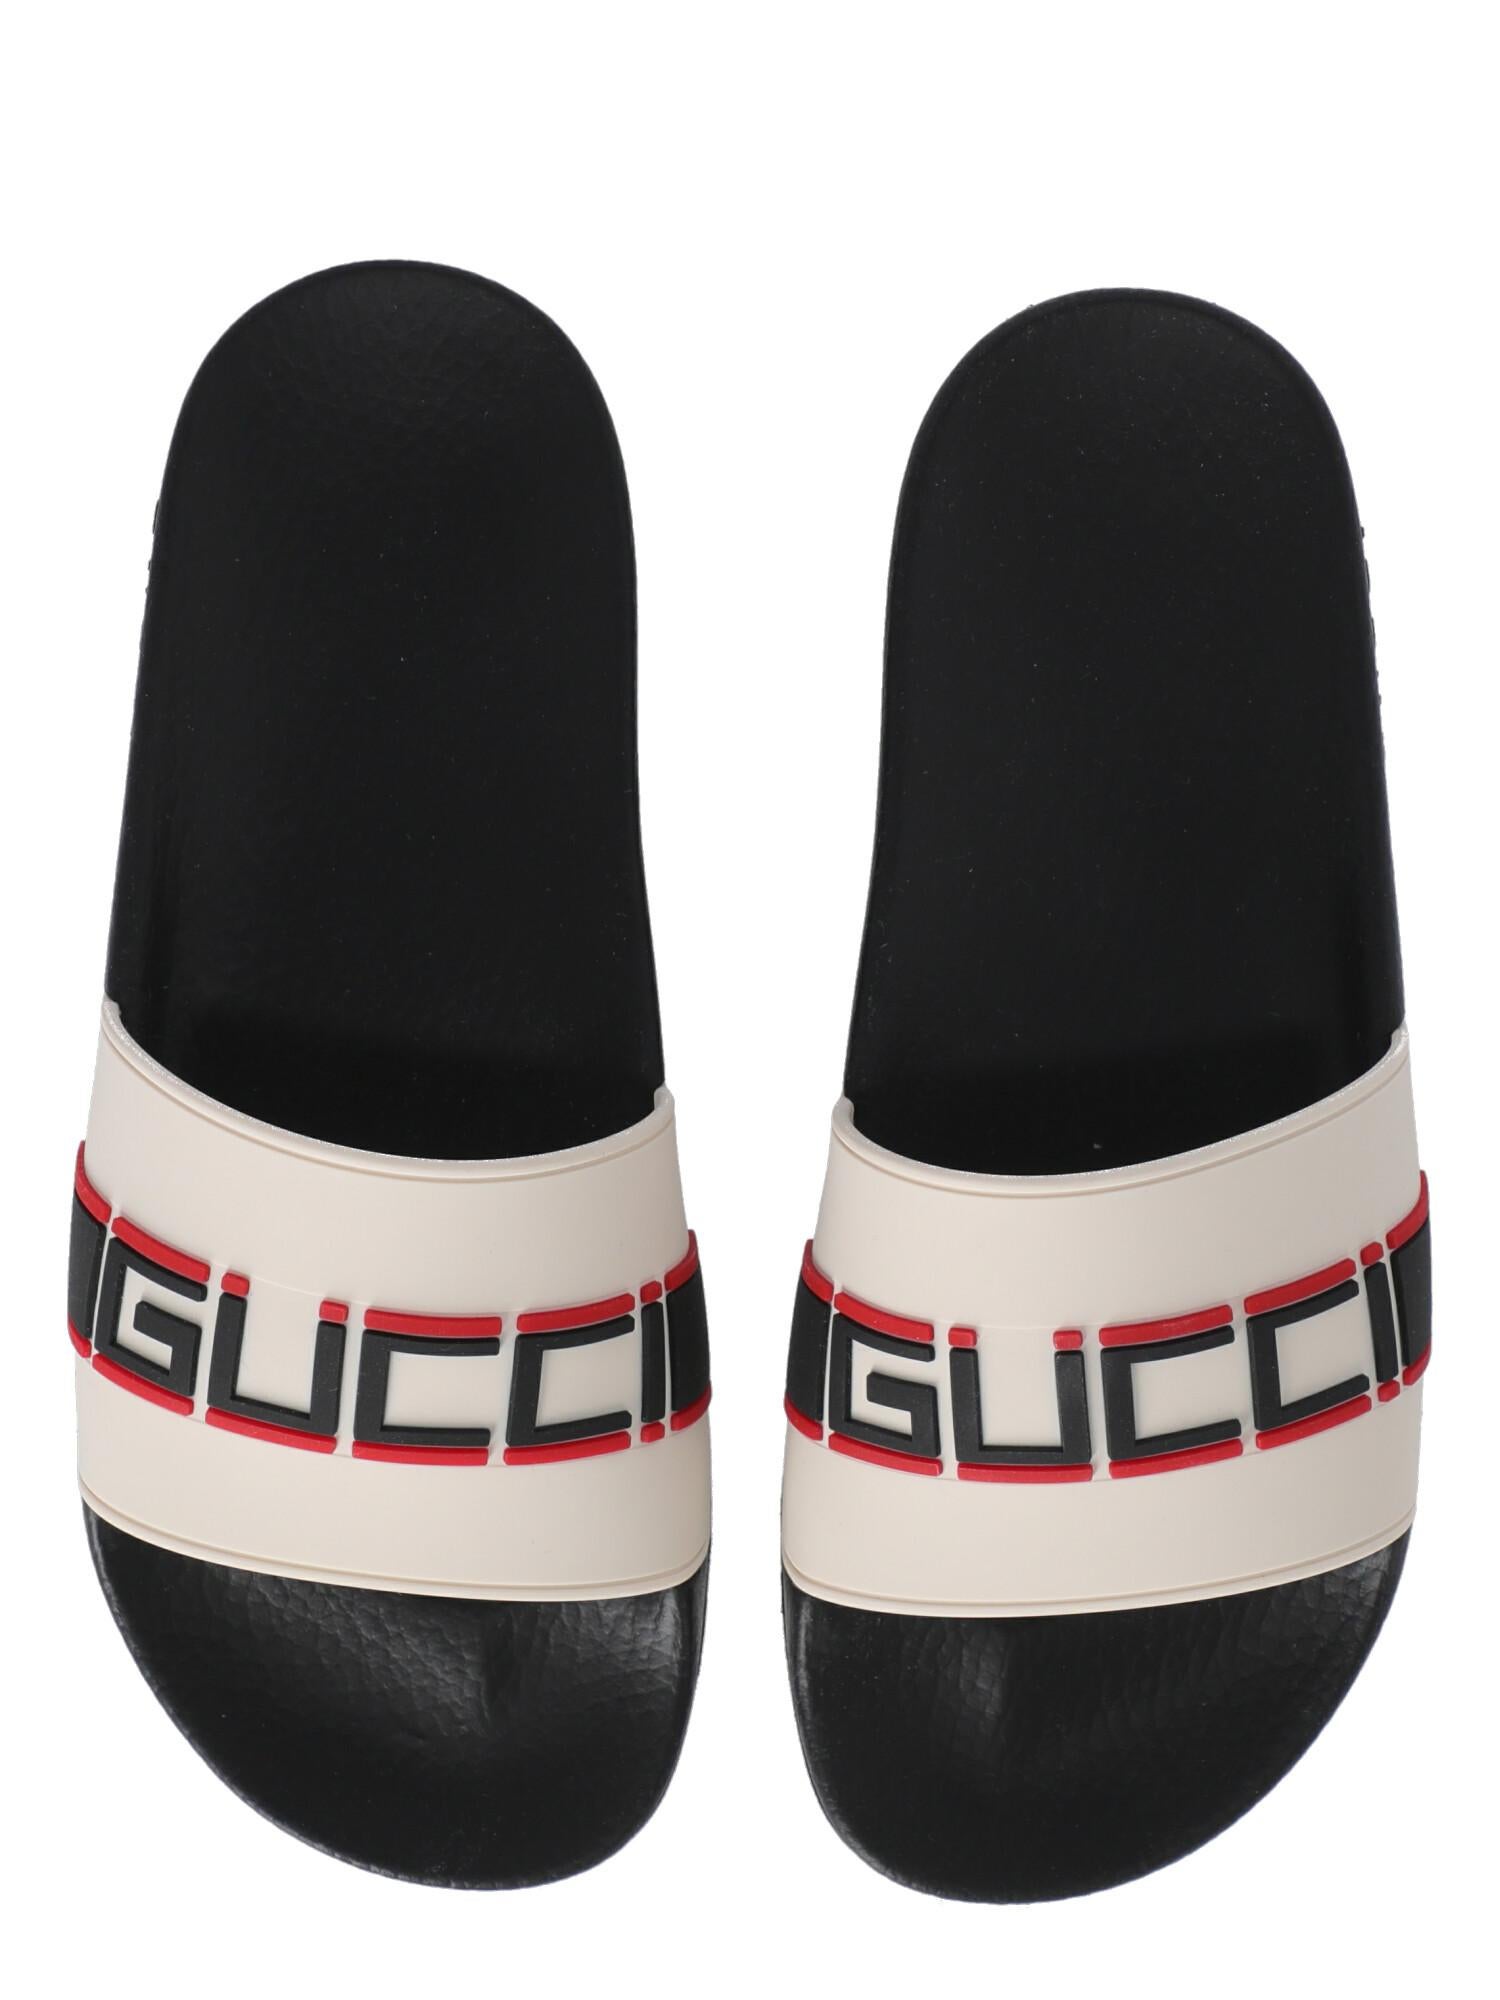 Gucci Women Slippers Black, Red, White Synthetic Fibers EU 39 For Sale 1